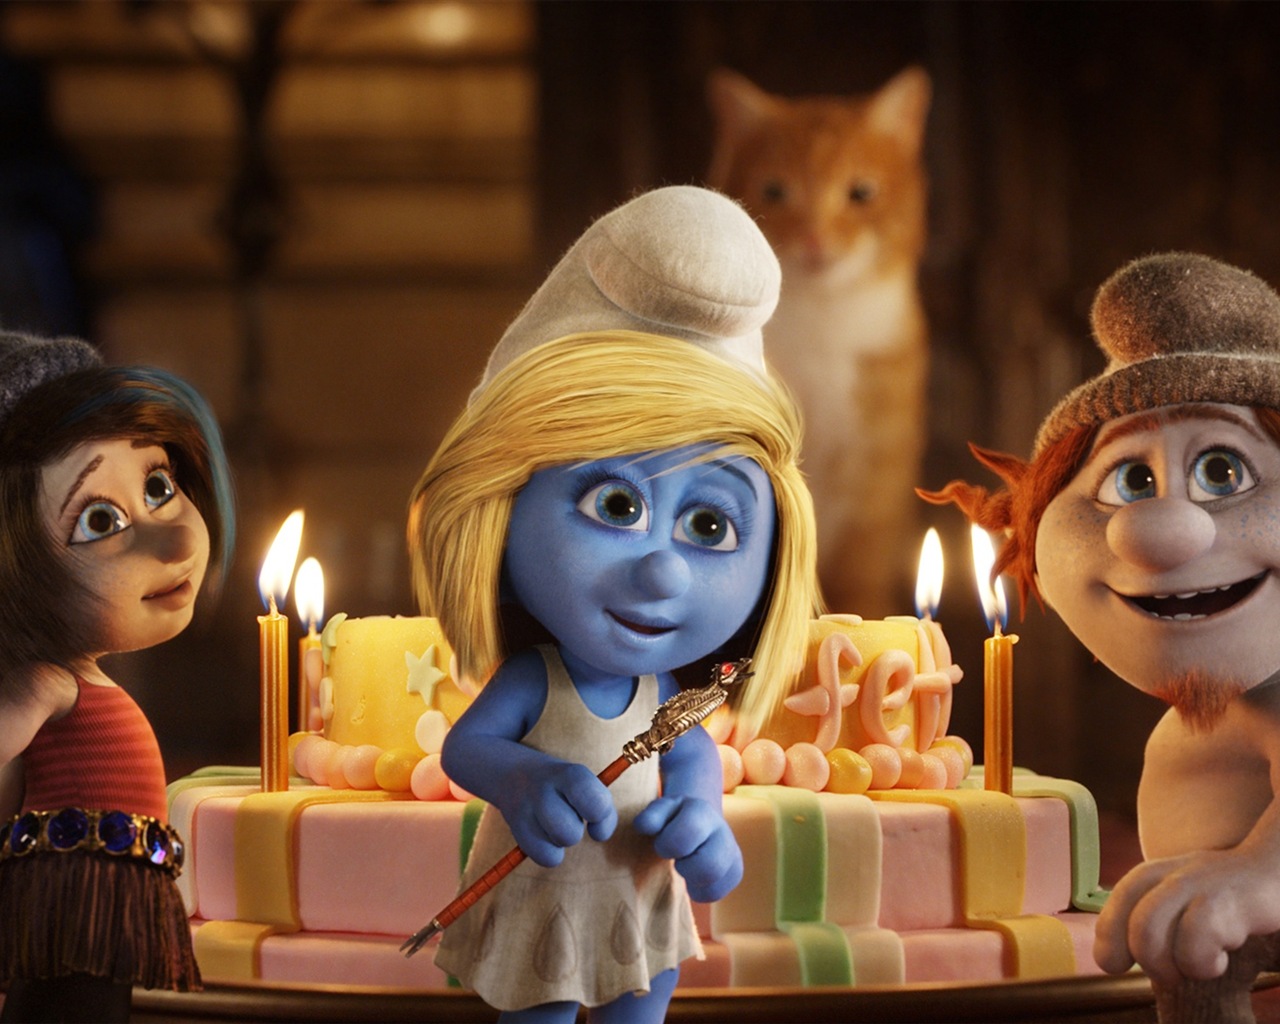 The Smurfs 2 HD movie wallpapers #2 - 1280x1024